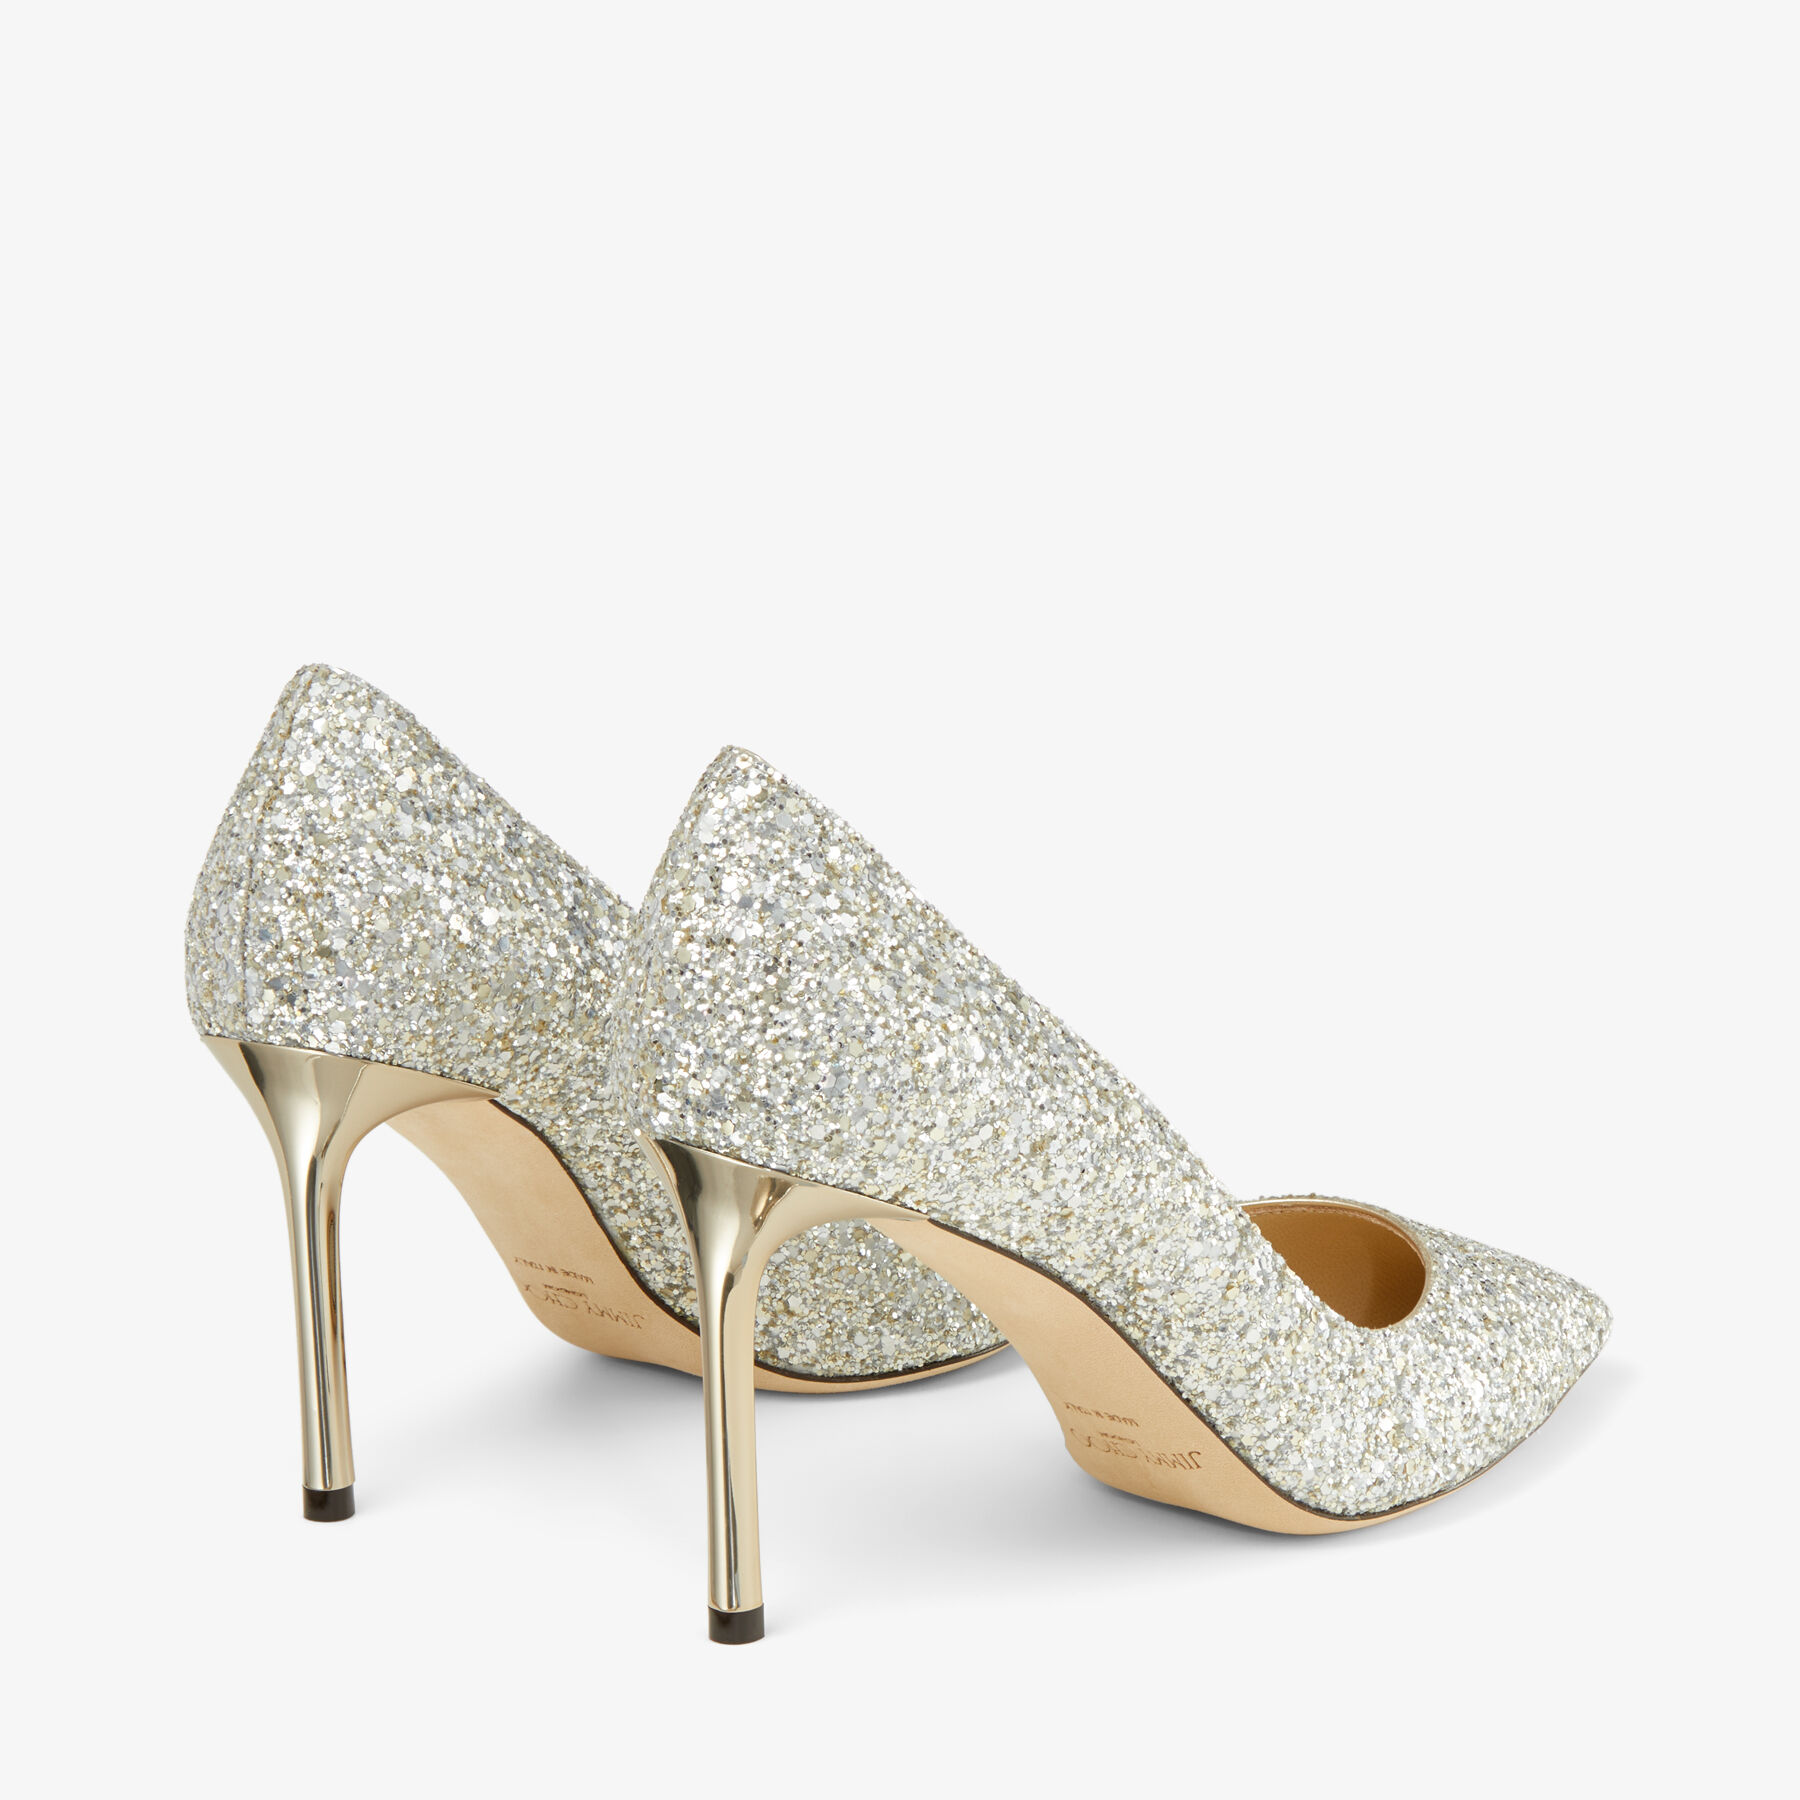 OFFICE Marianna Embellished Court Shoes Silver - Heels